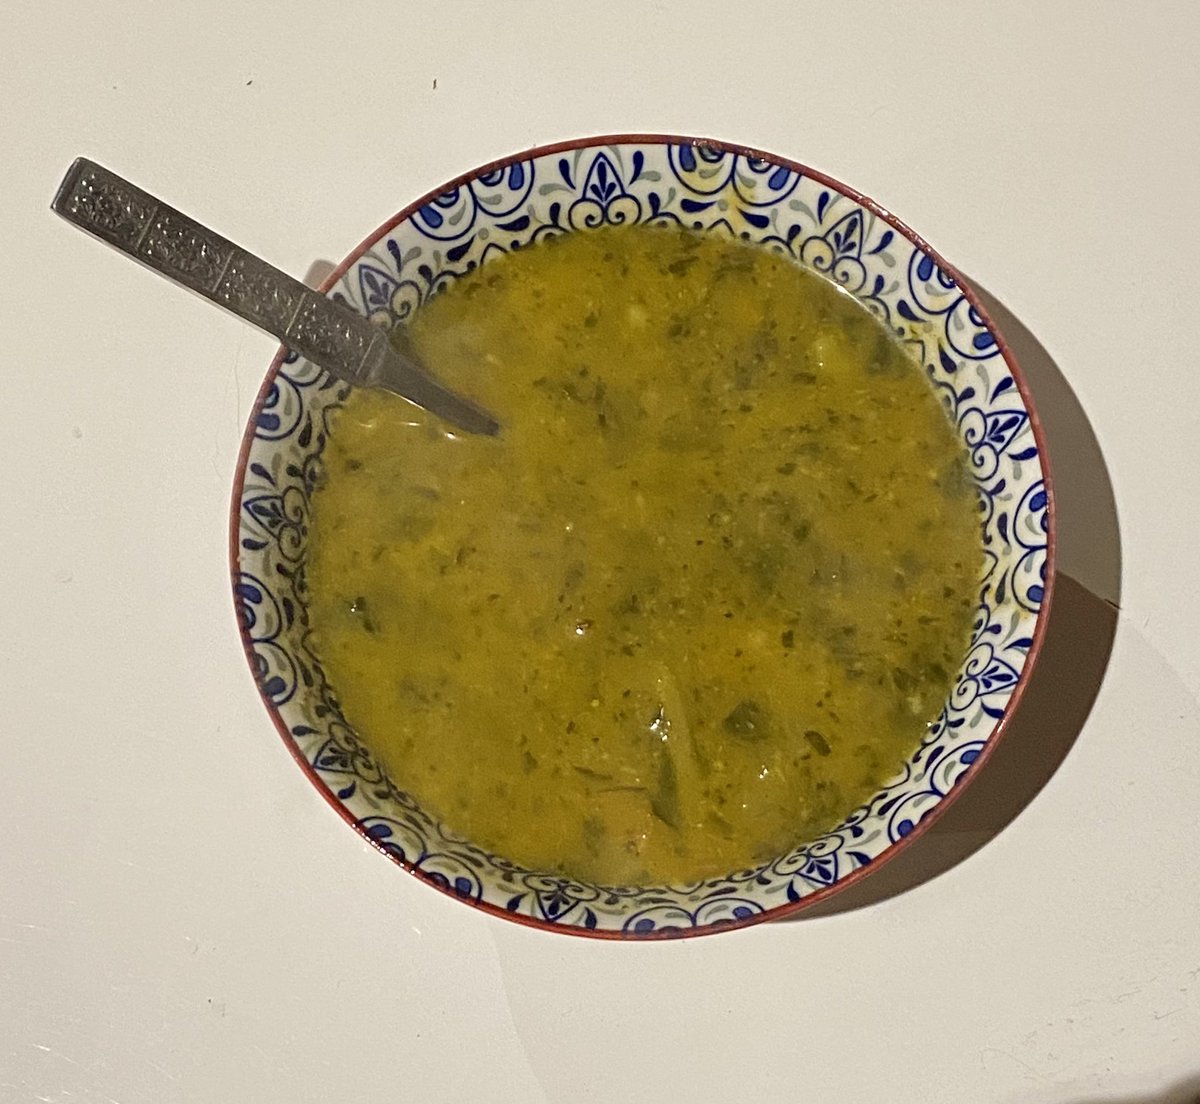 Made one of those soups with the veggies in the bottom of the fridge that are just about ready for the fogo bin. Delicious, and even better as leftovers the next day.